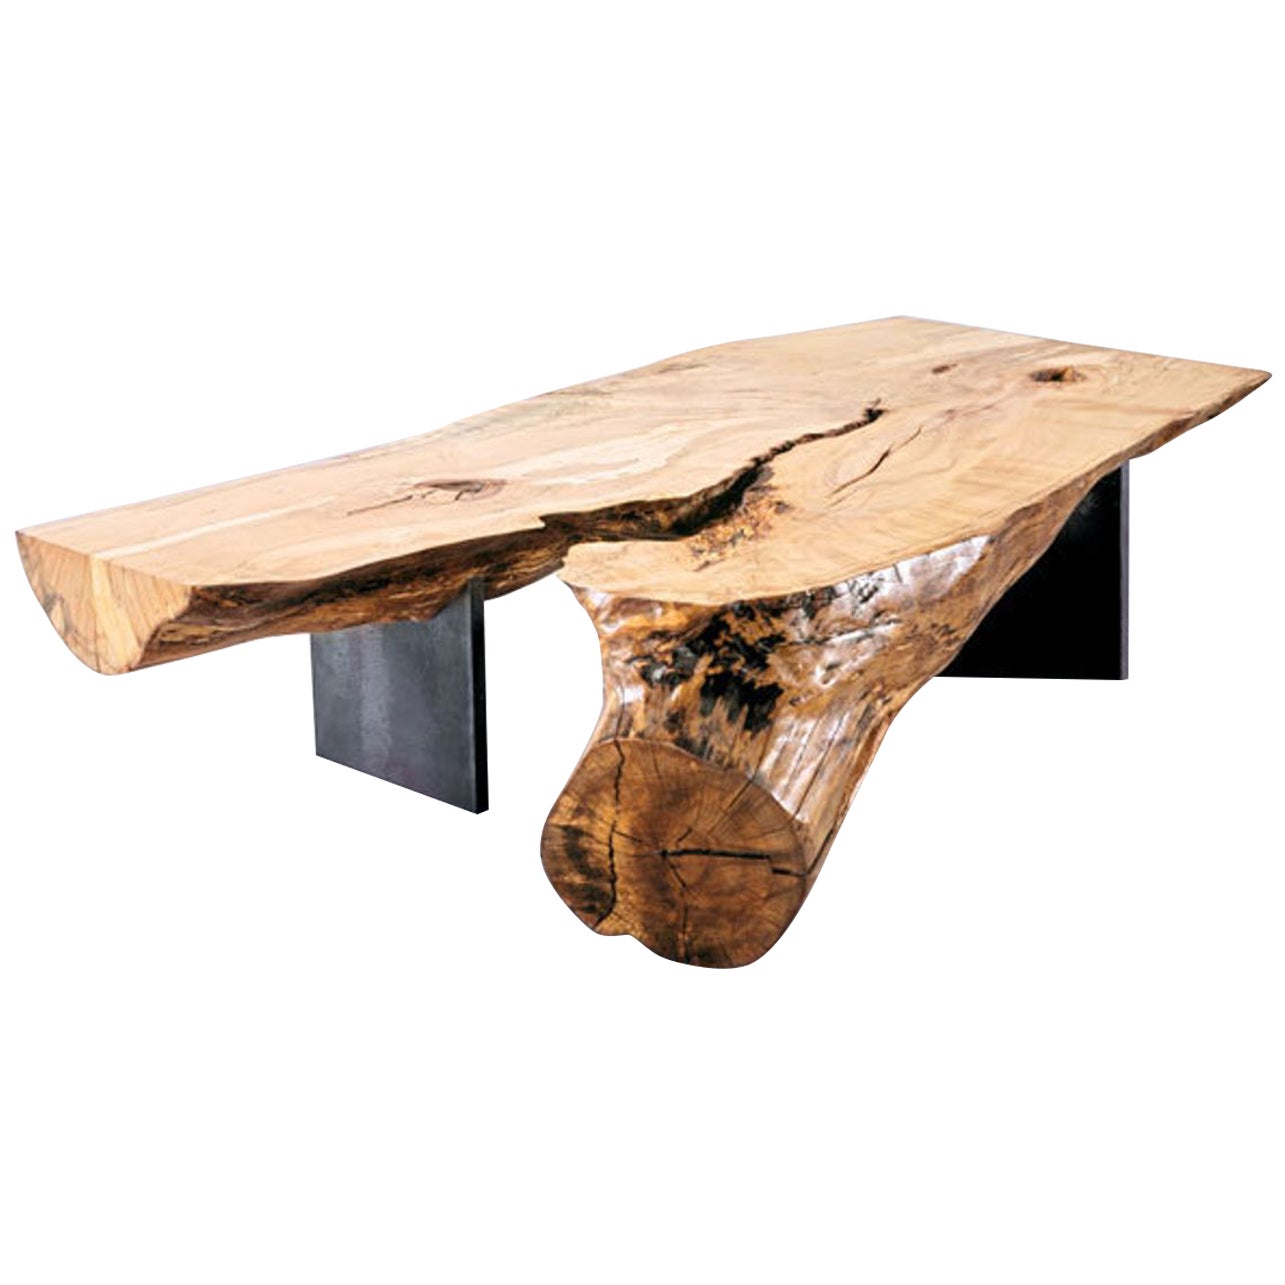 Organic Spalted Maple Round back steel leg Low Table / Bench For Sale